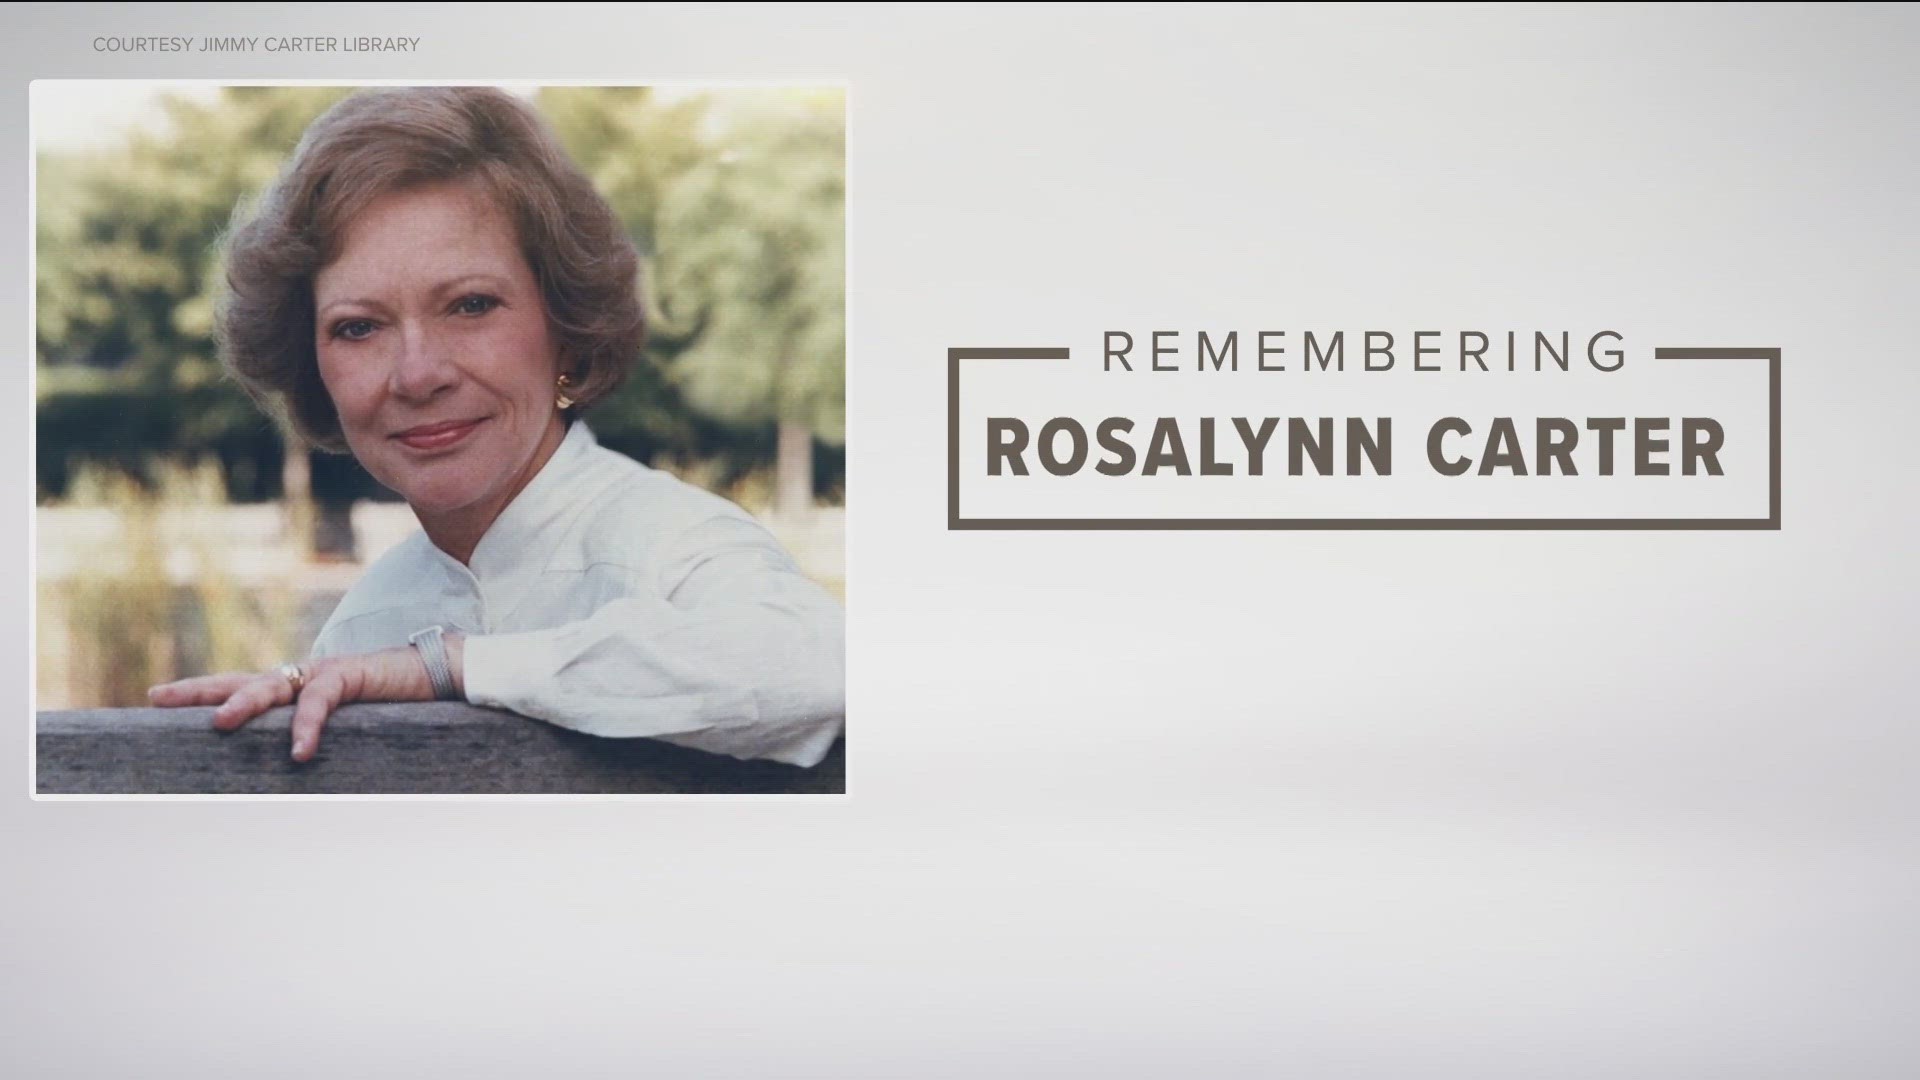 Rosalynn Carter was first lady of the United States and a pioneering mental health advocate.